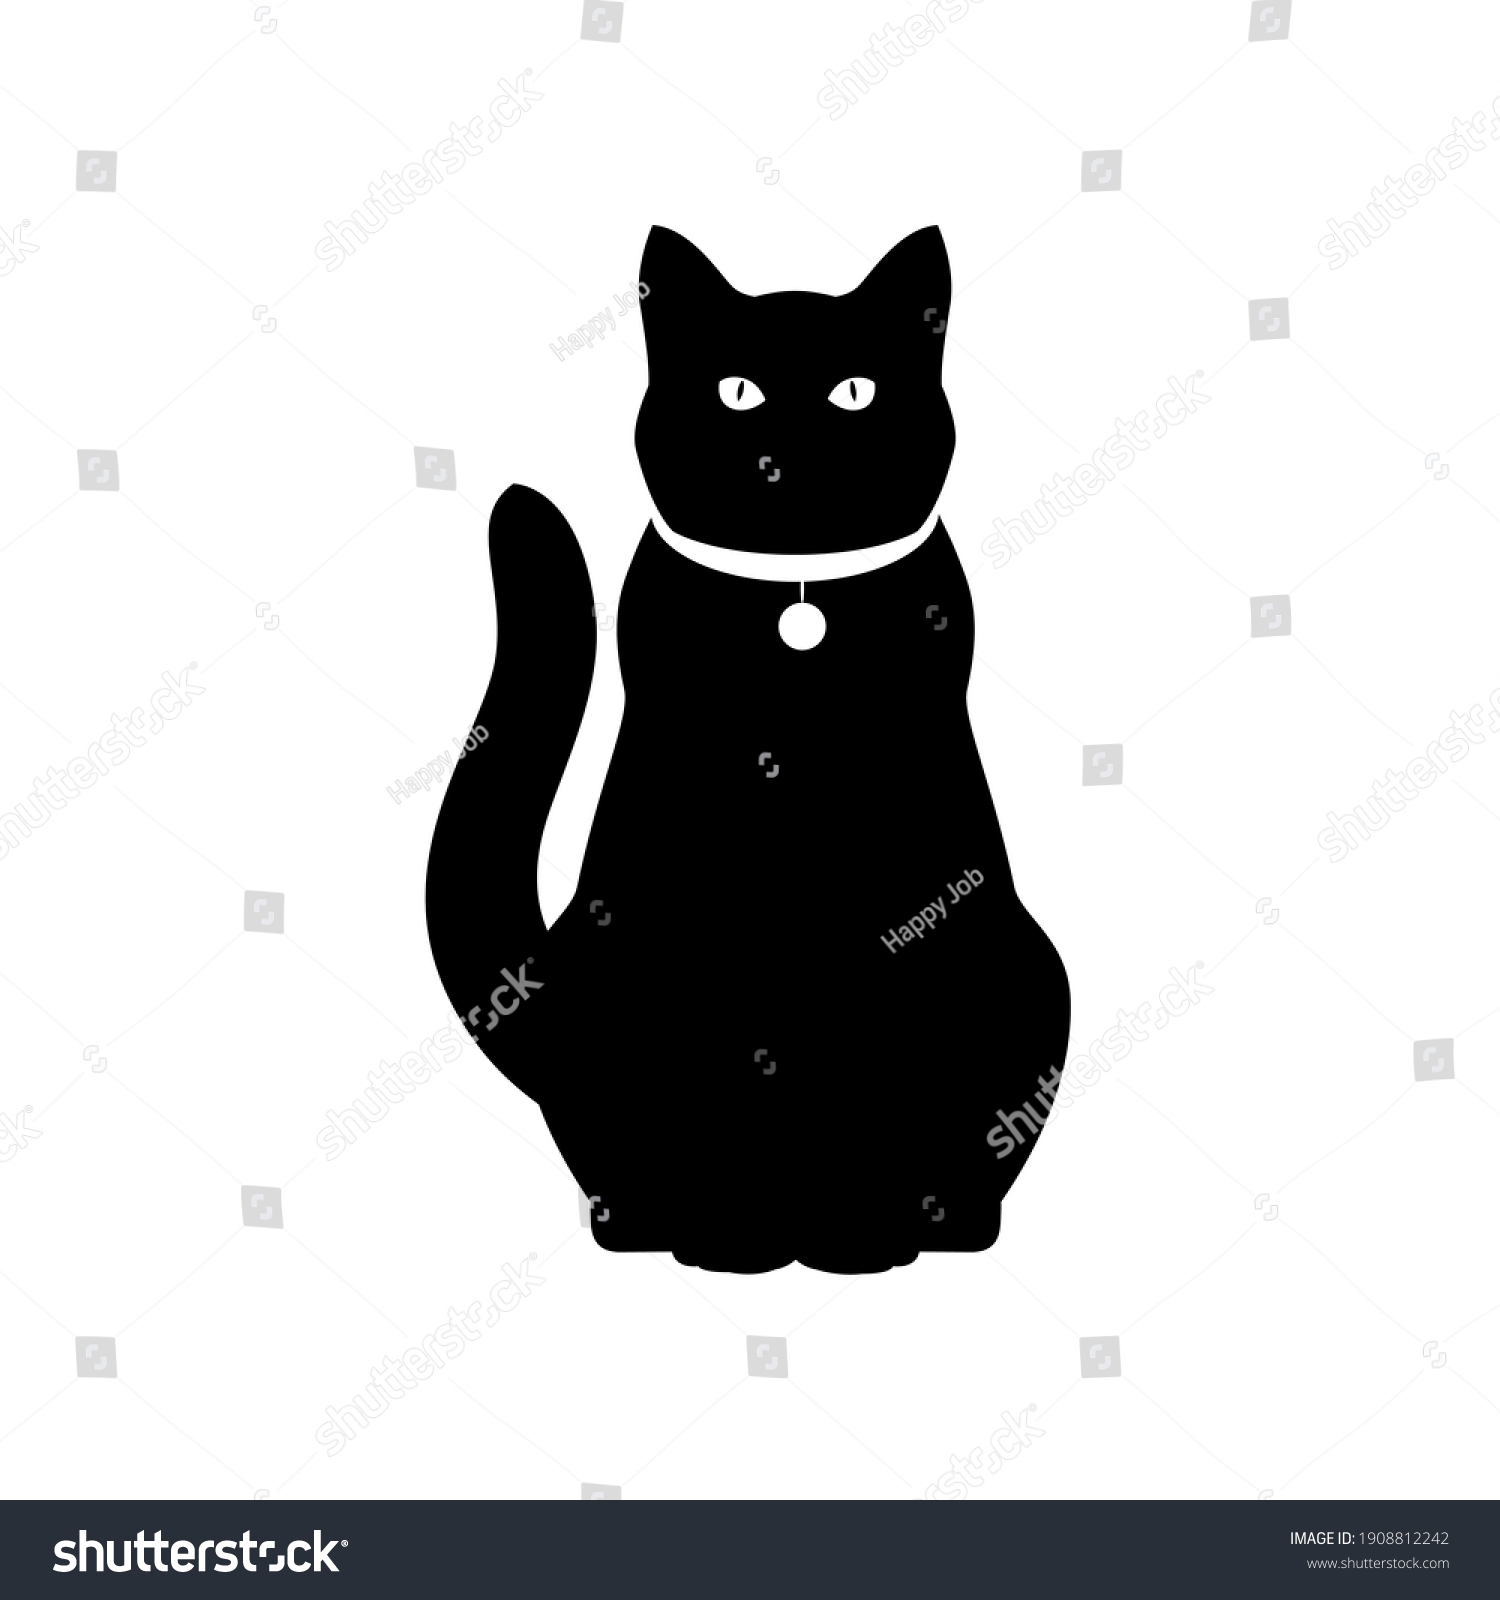 Black Cat Silhouette On White Background Stock Vector (Royalty Free ...